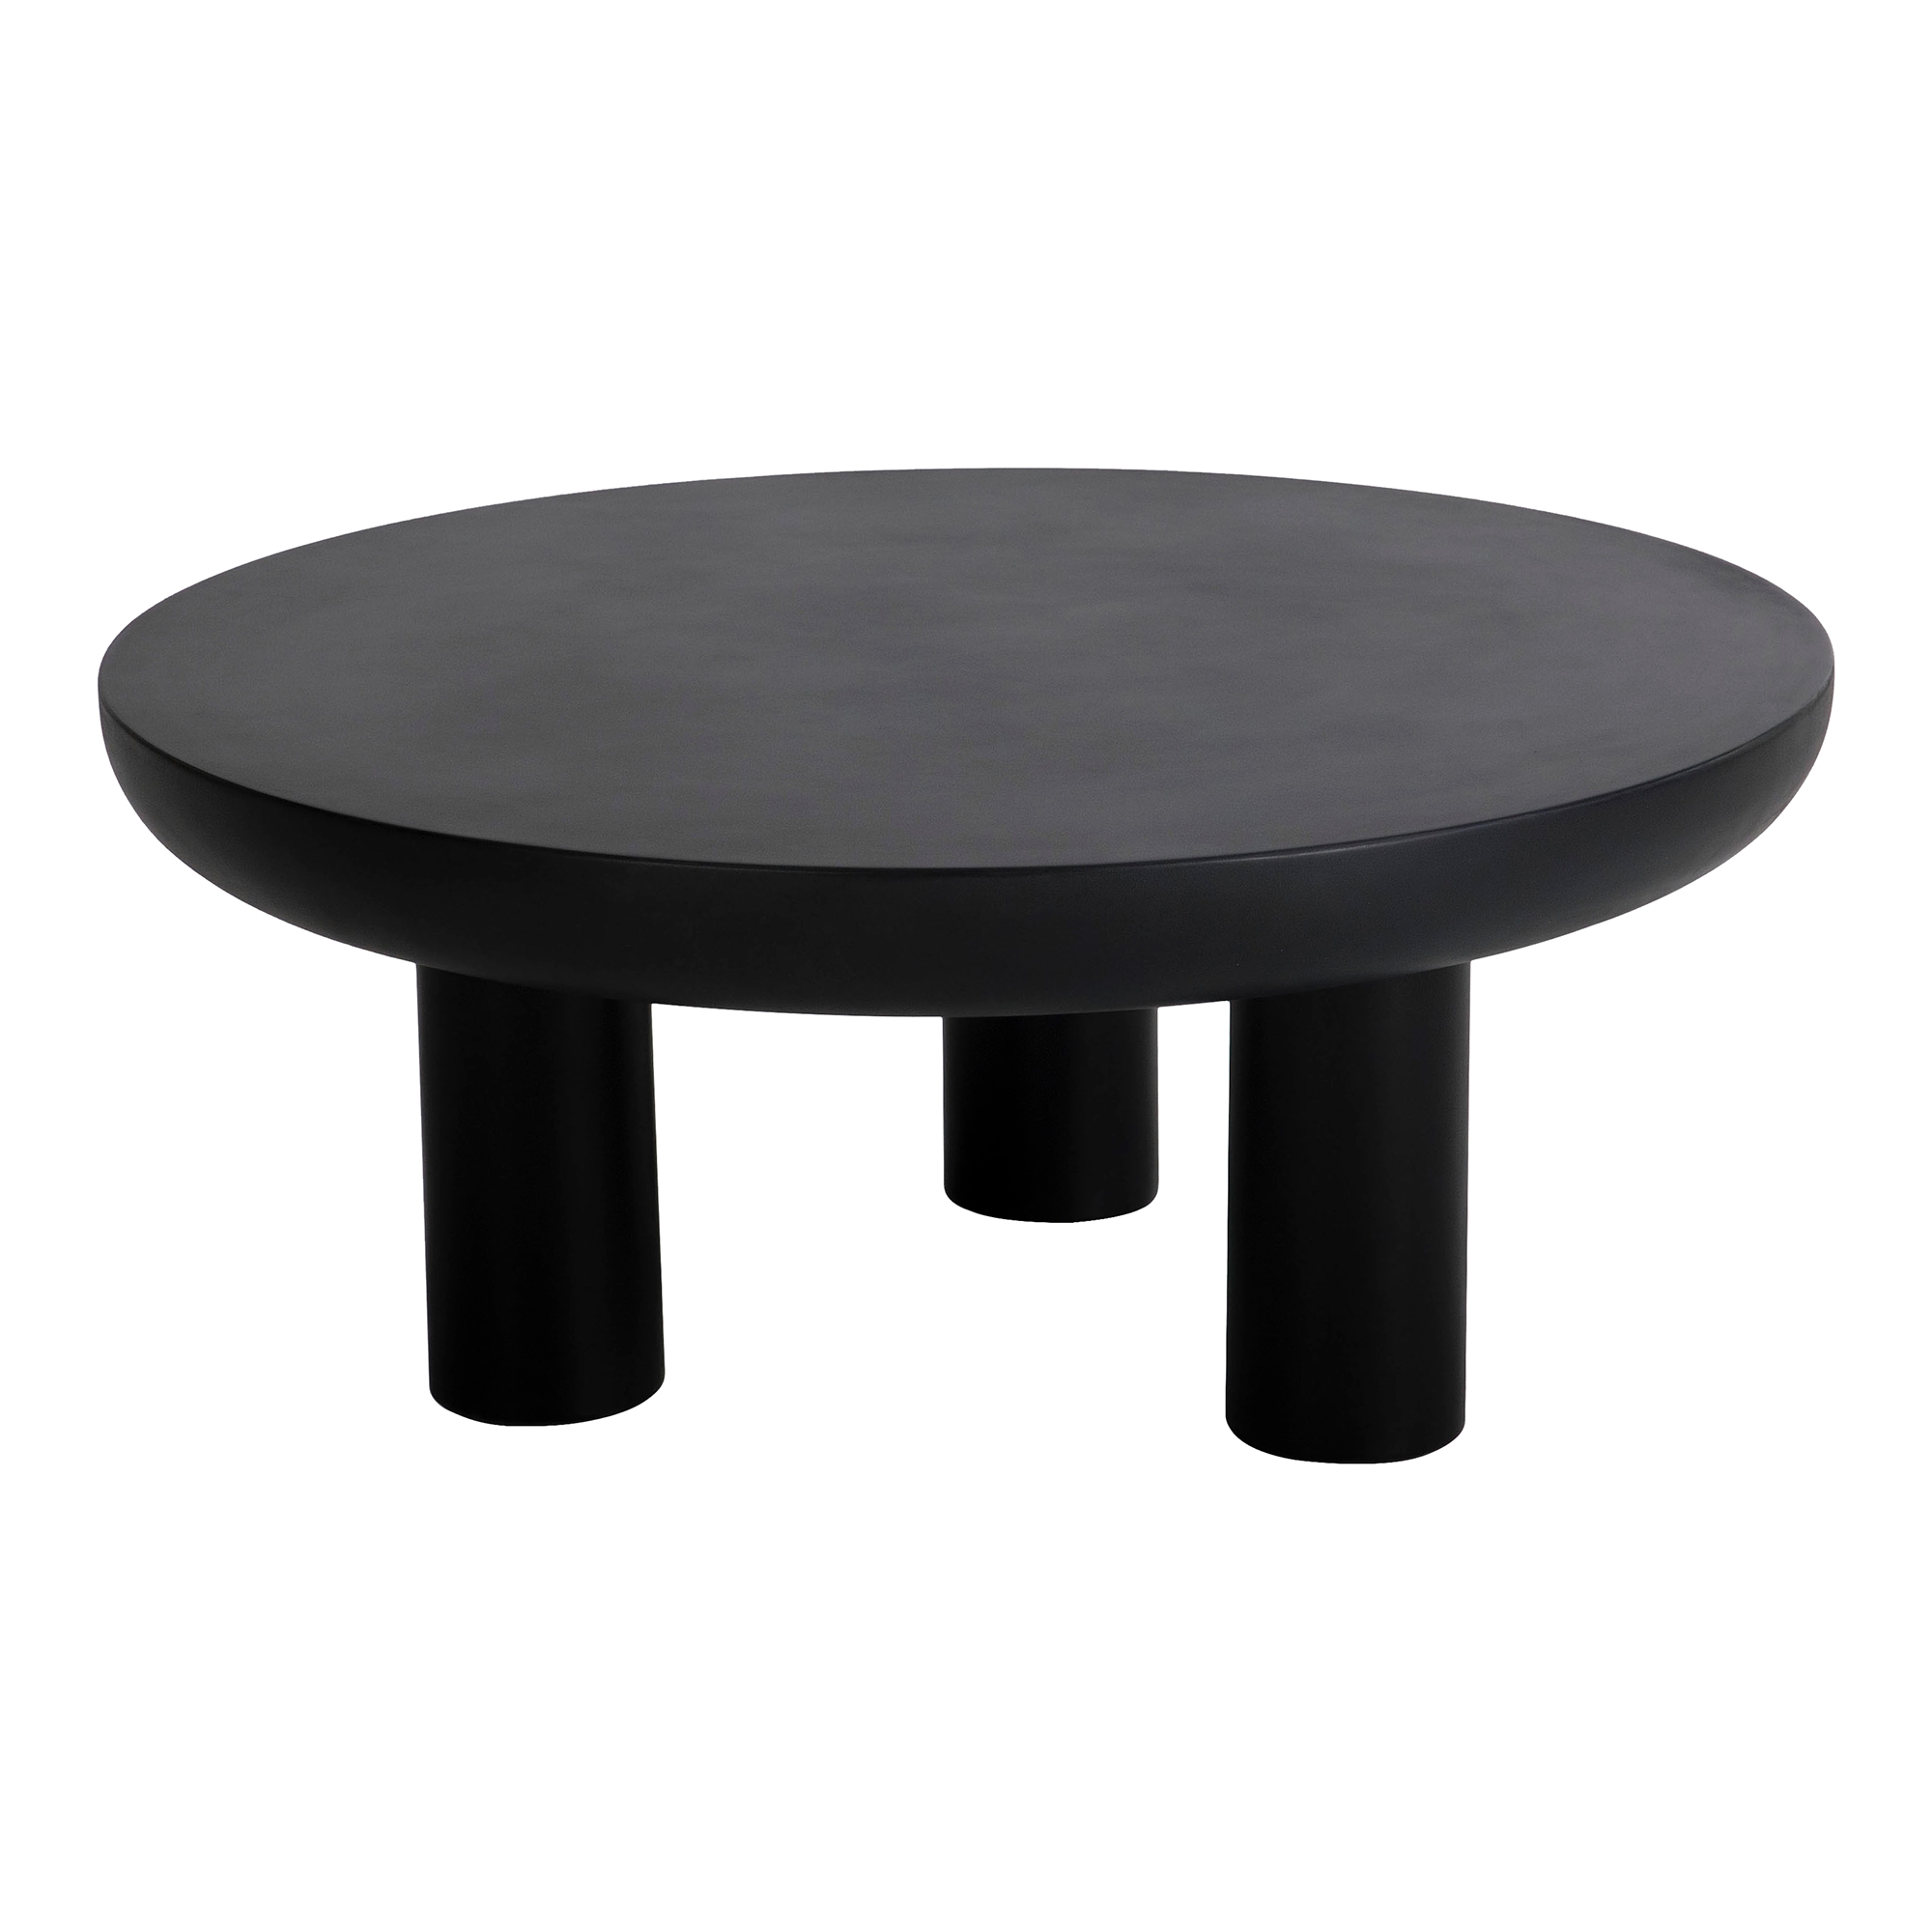 Rocca Coffee Table - Image 2